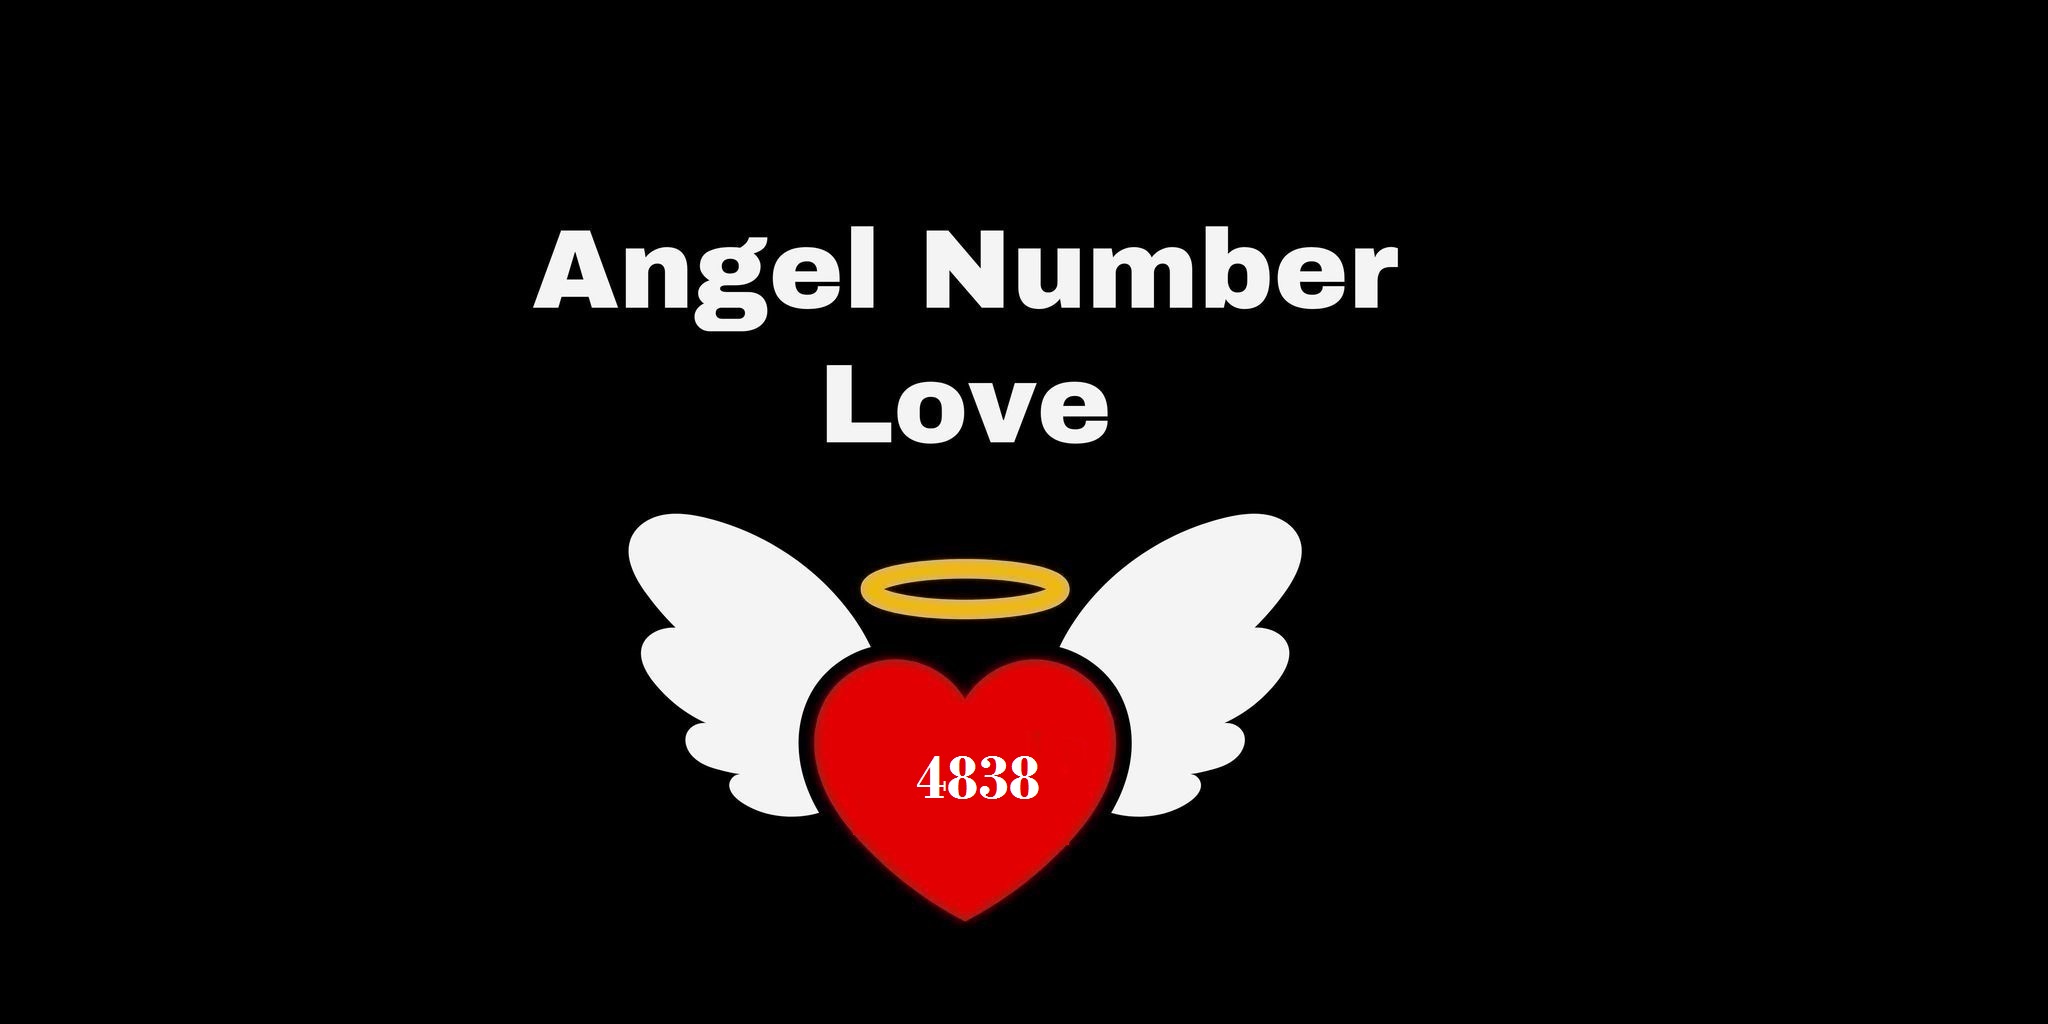 4838 Angel Number Meaning In Love